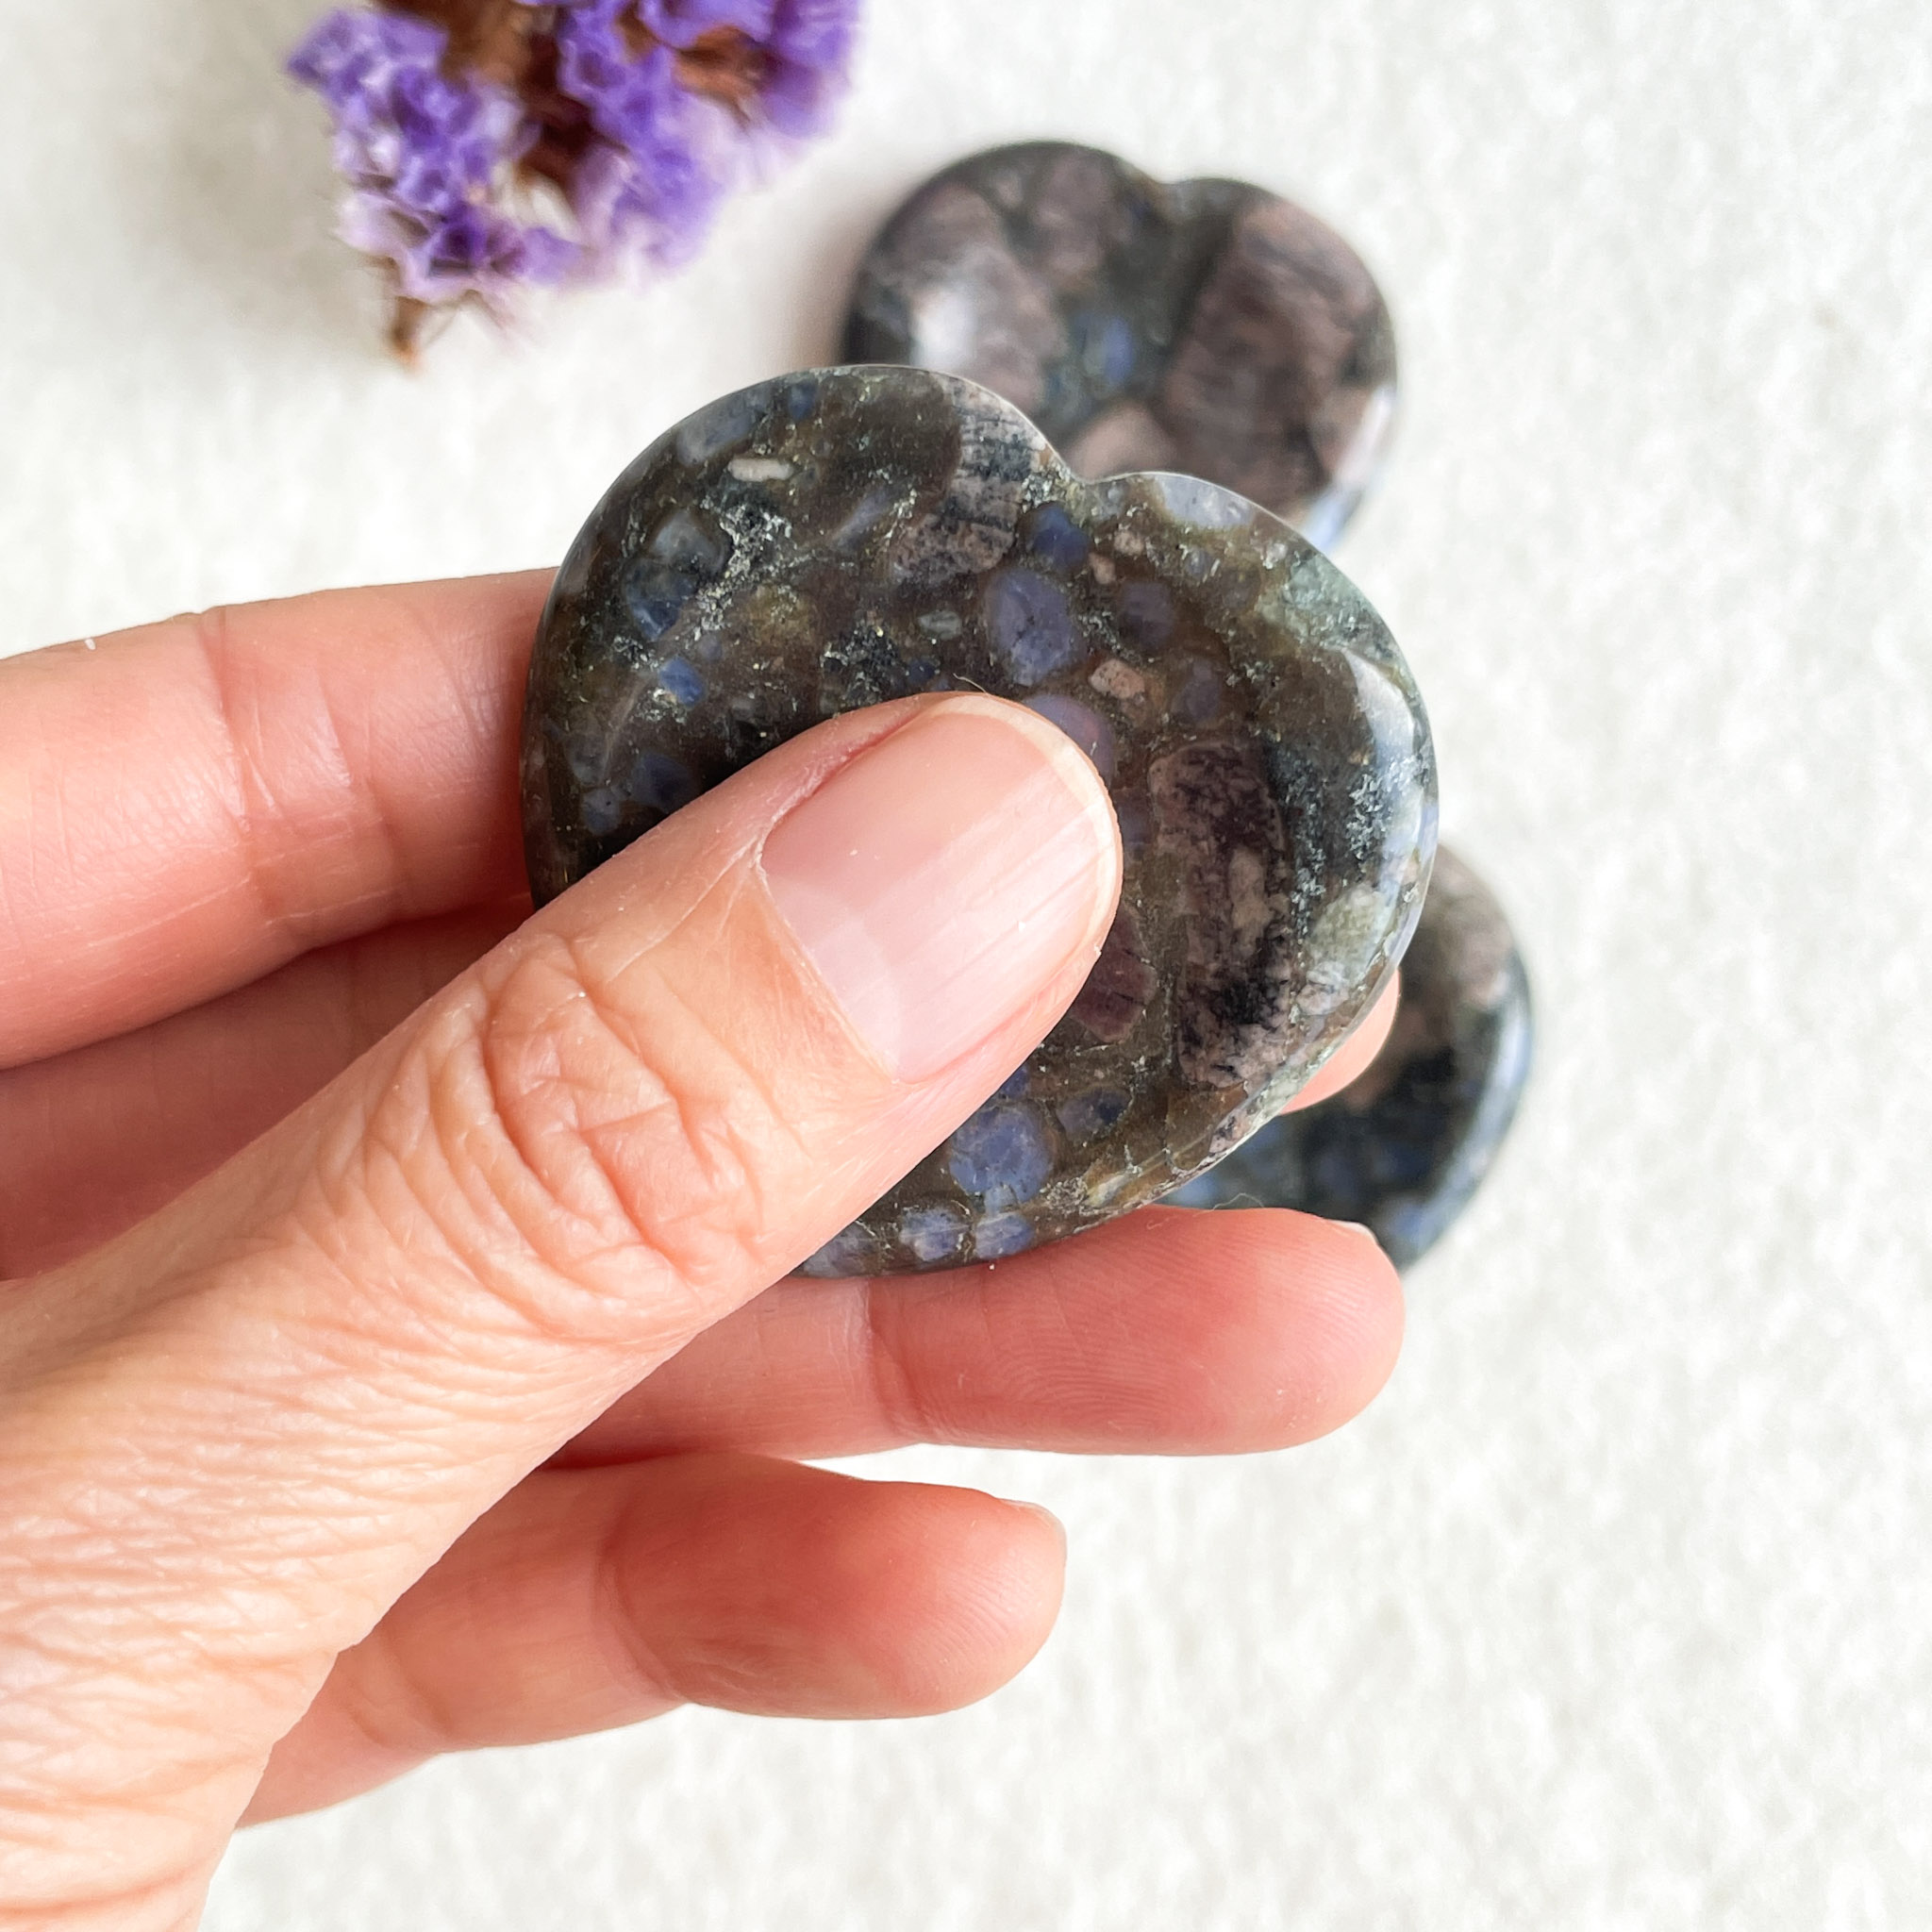 A hand holding a polished heart-shaped stone with a mix of dark and light blue colors, with similar stones and purple dried flowers visible in the background on a white surface.